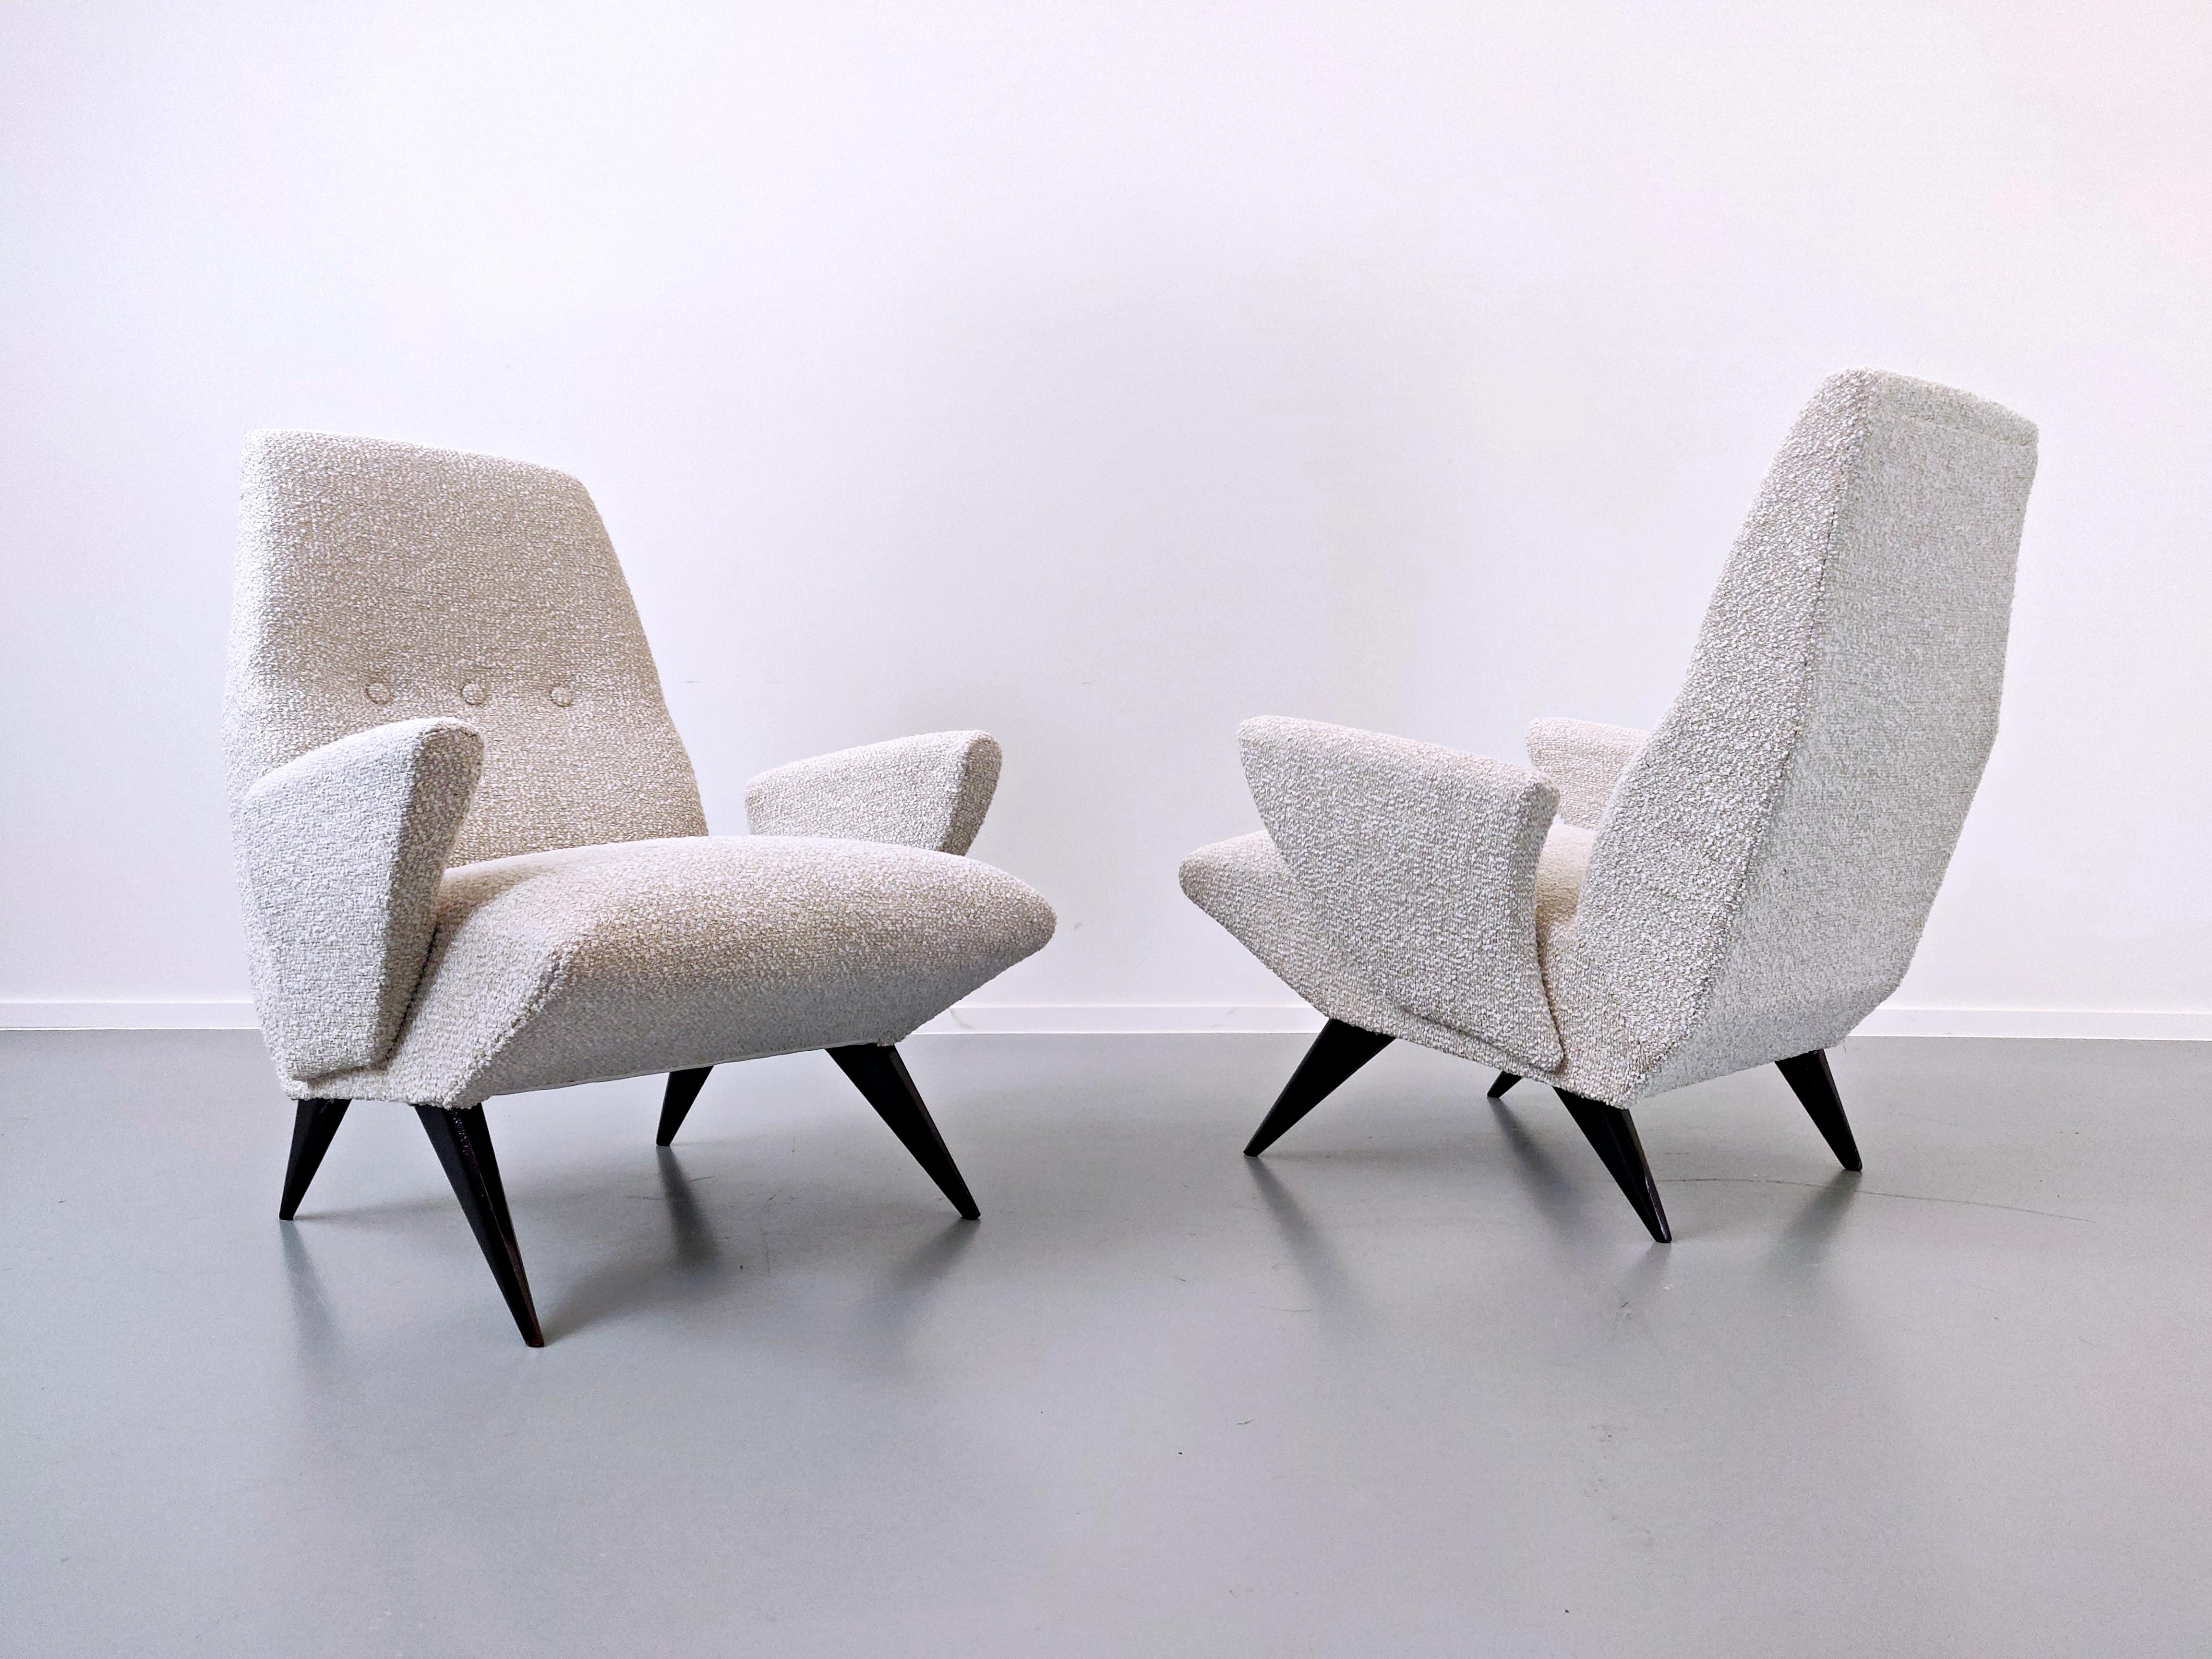 Pair of Mid-Century Modern  Armchairs by Nino Zoncada for Frimar, Italy  In Good Condition For Sale In Brussels, BE